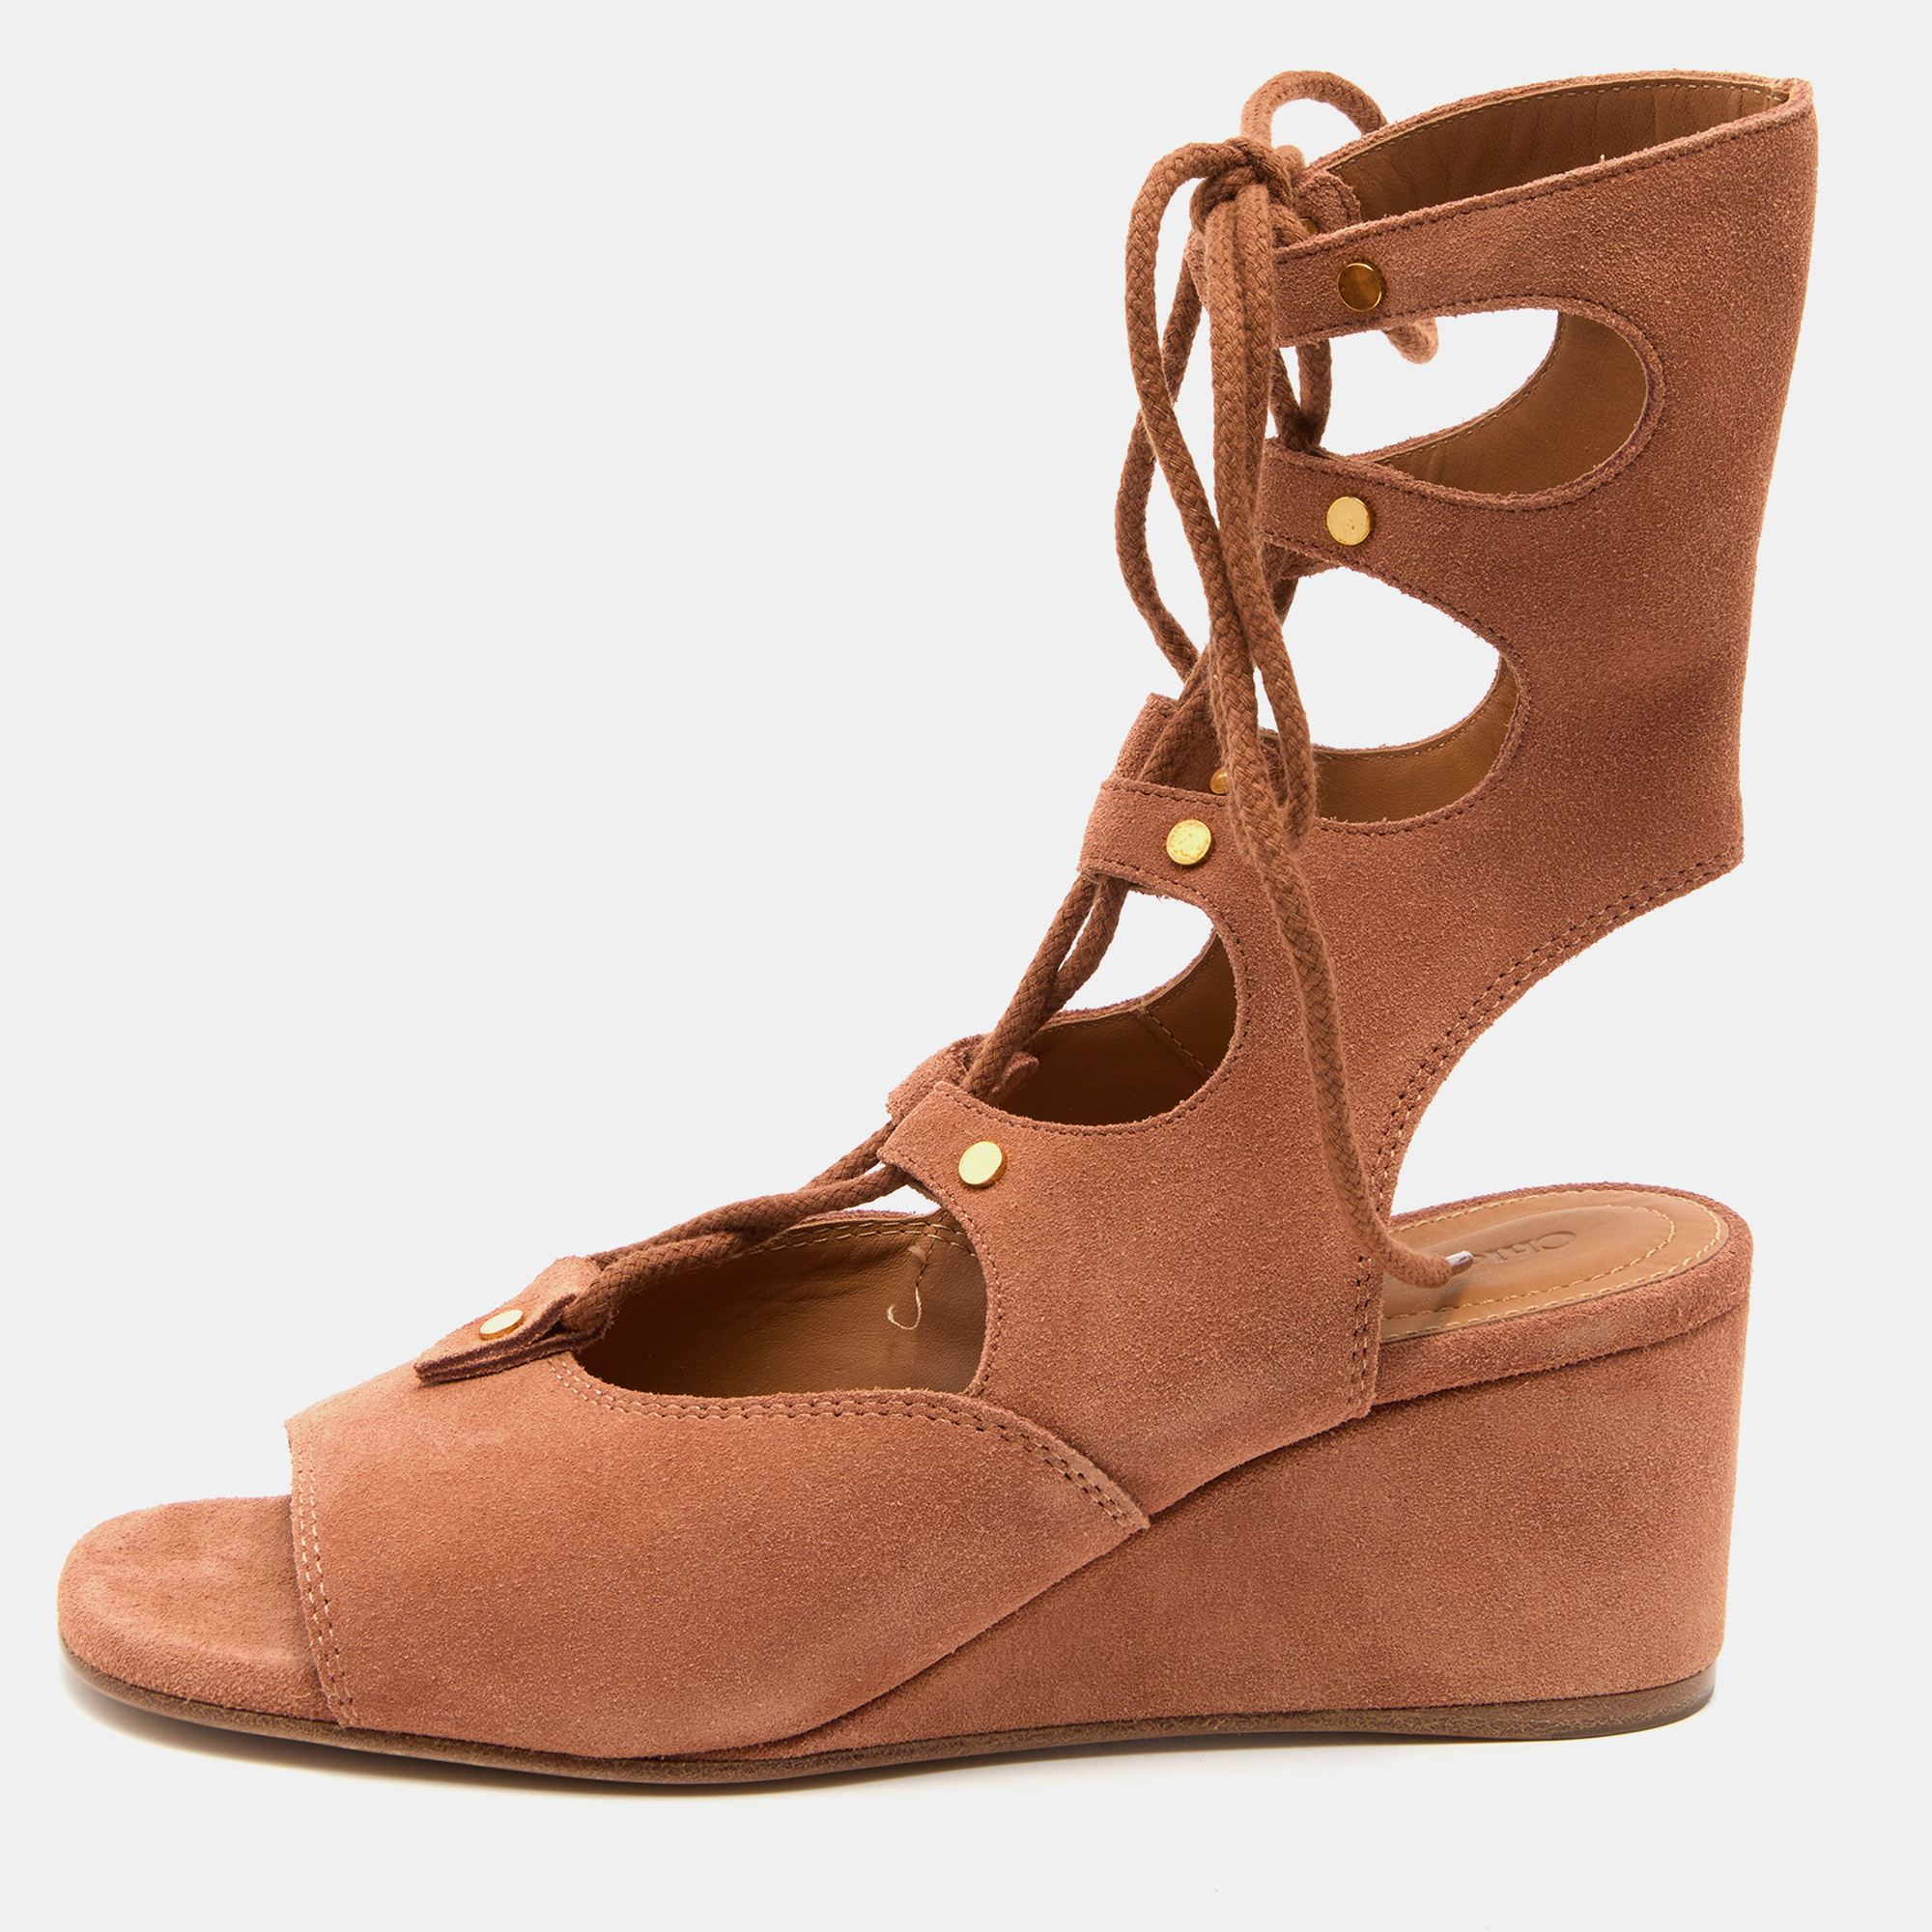 

Chloe Brown Suede Caged Tie Up Ghillie Wedge Sandals Size